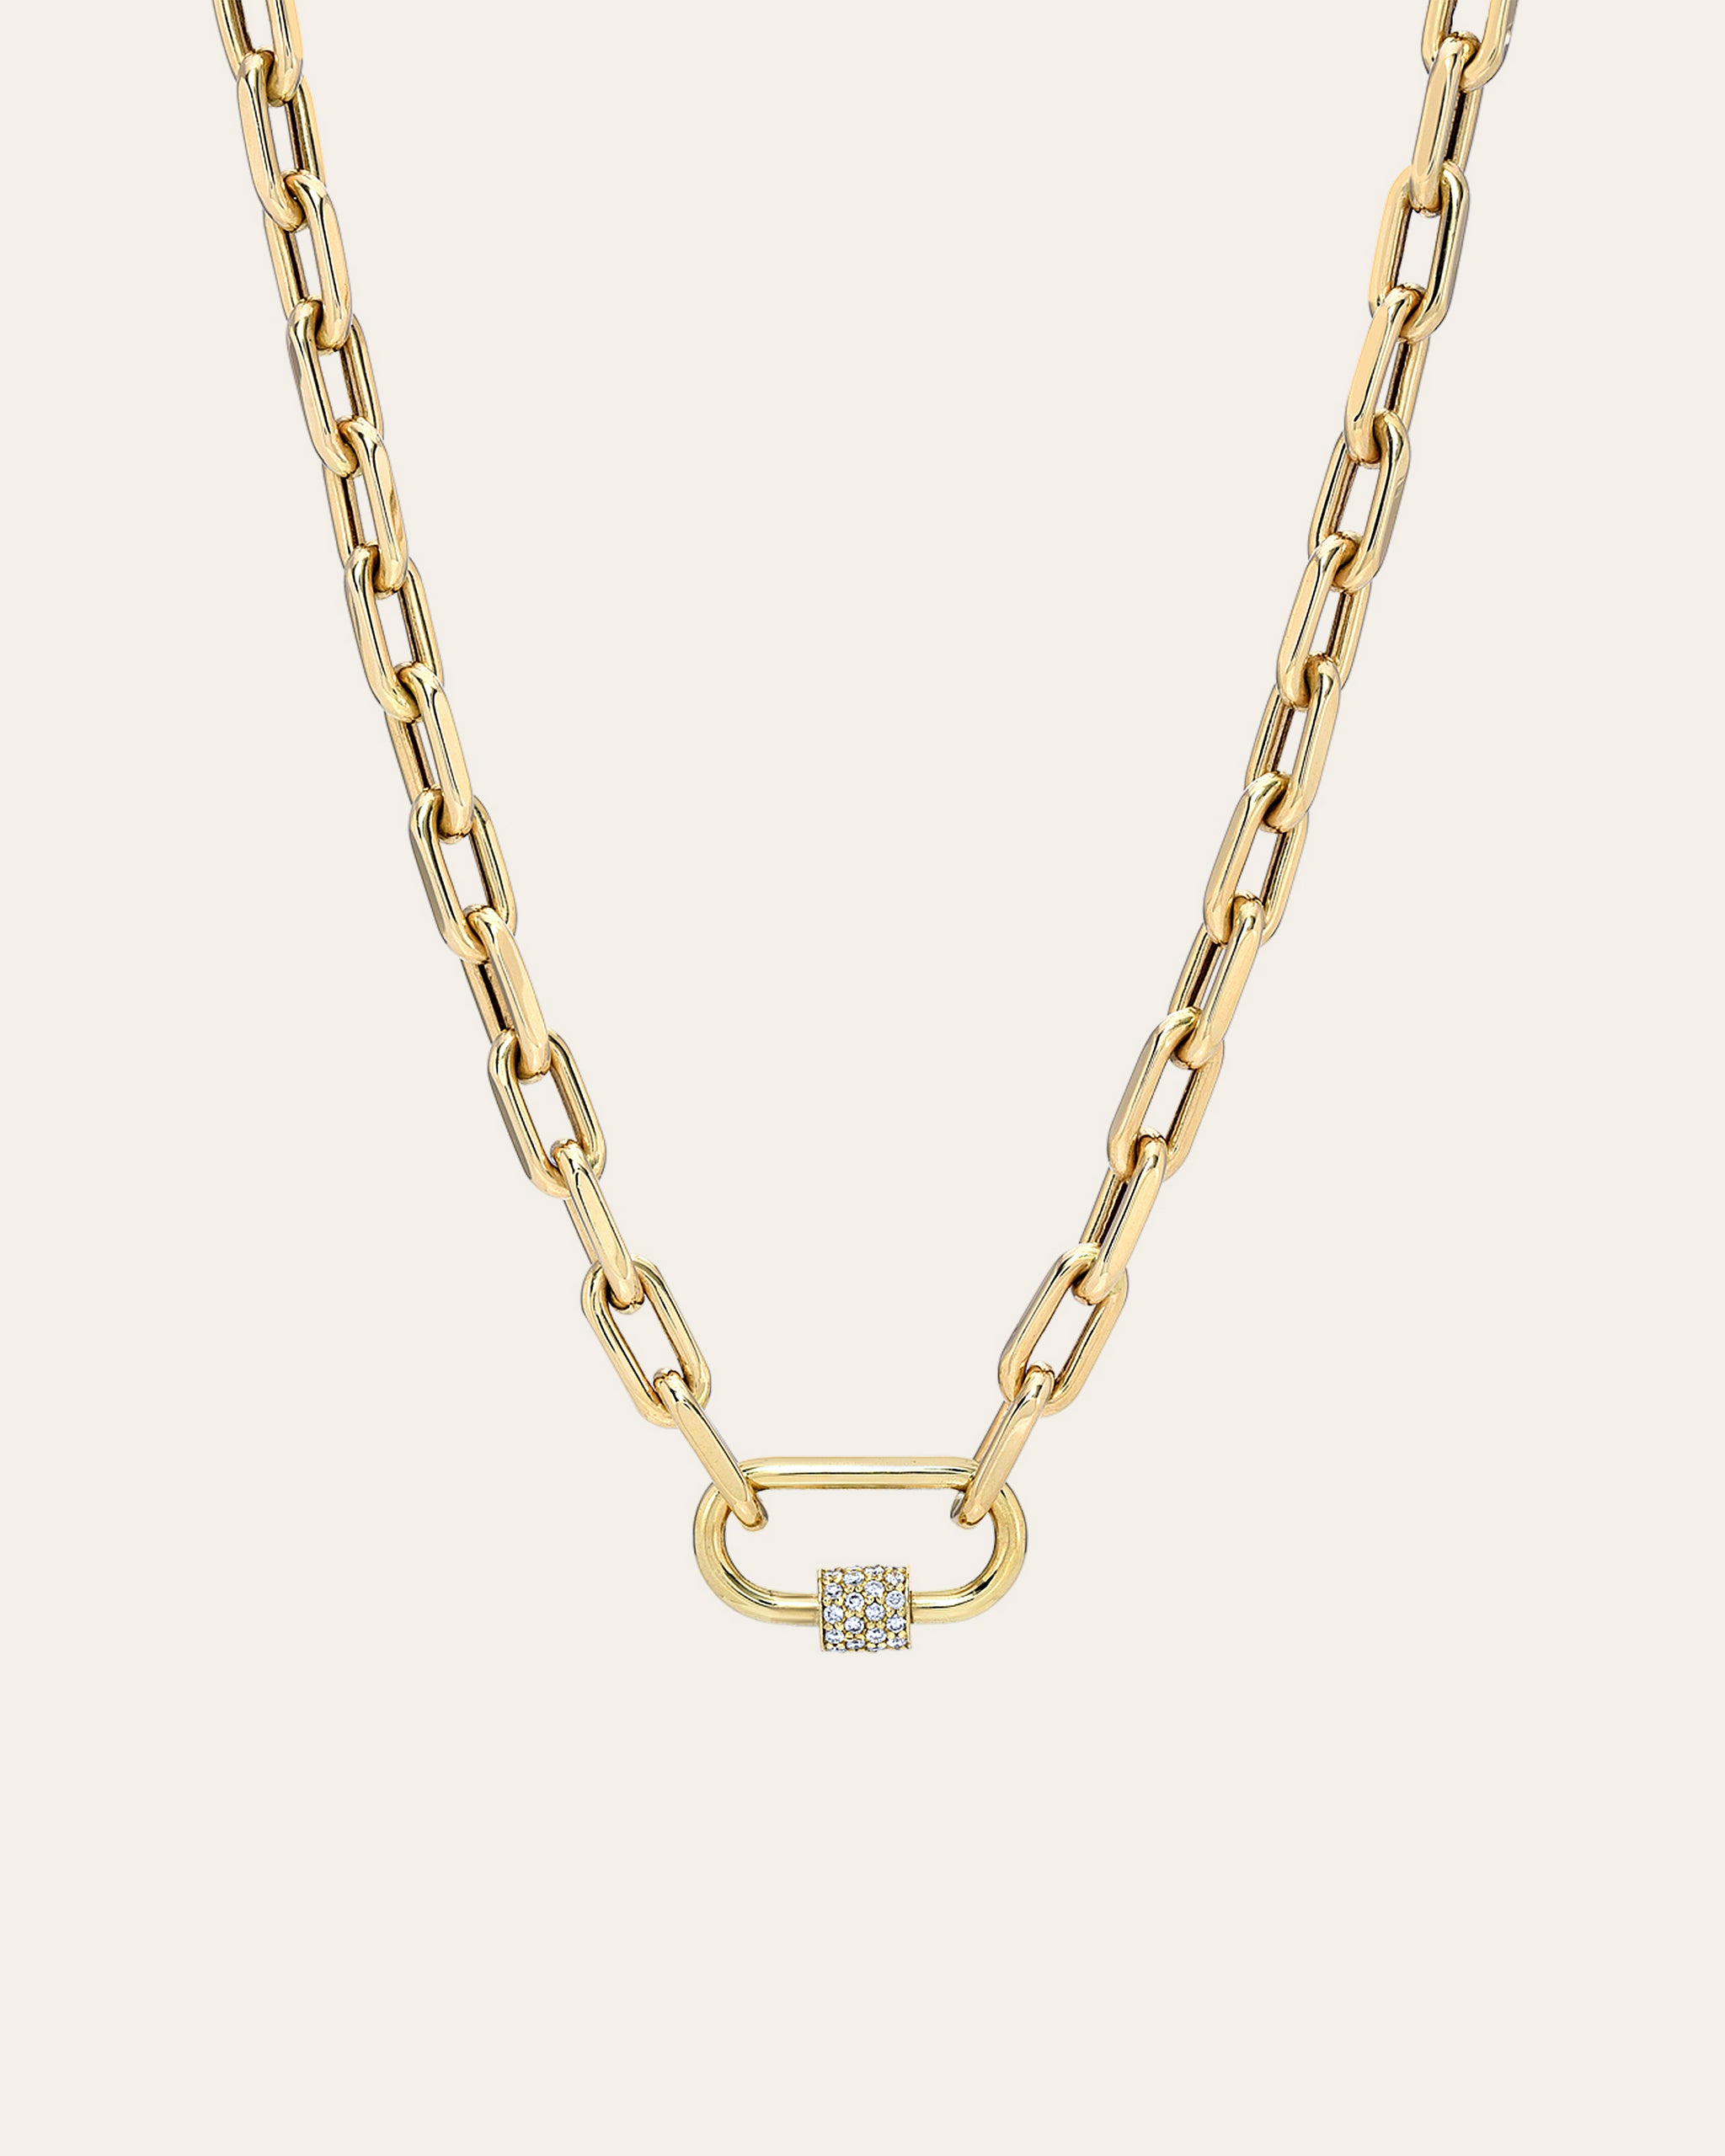 14K Gold Large Open Link Chain with Diamond Carabiner Necklace 14K Rose Gold / 18 +$300